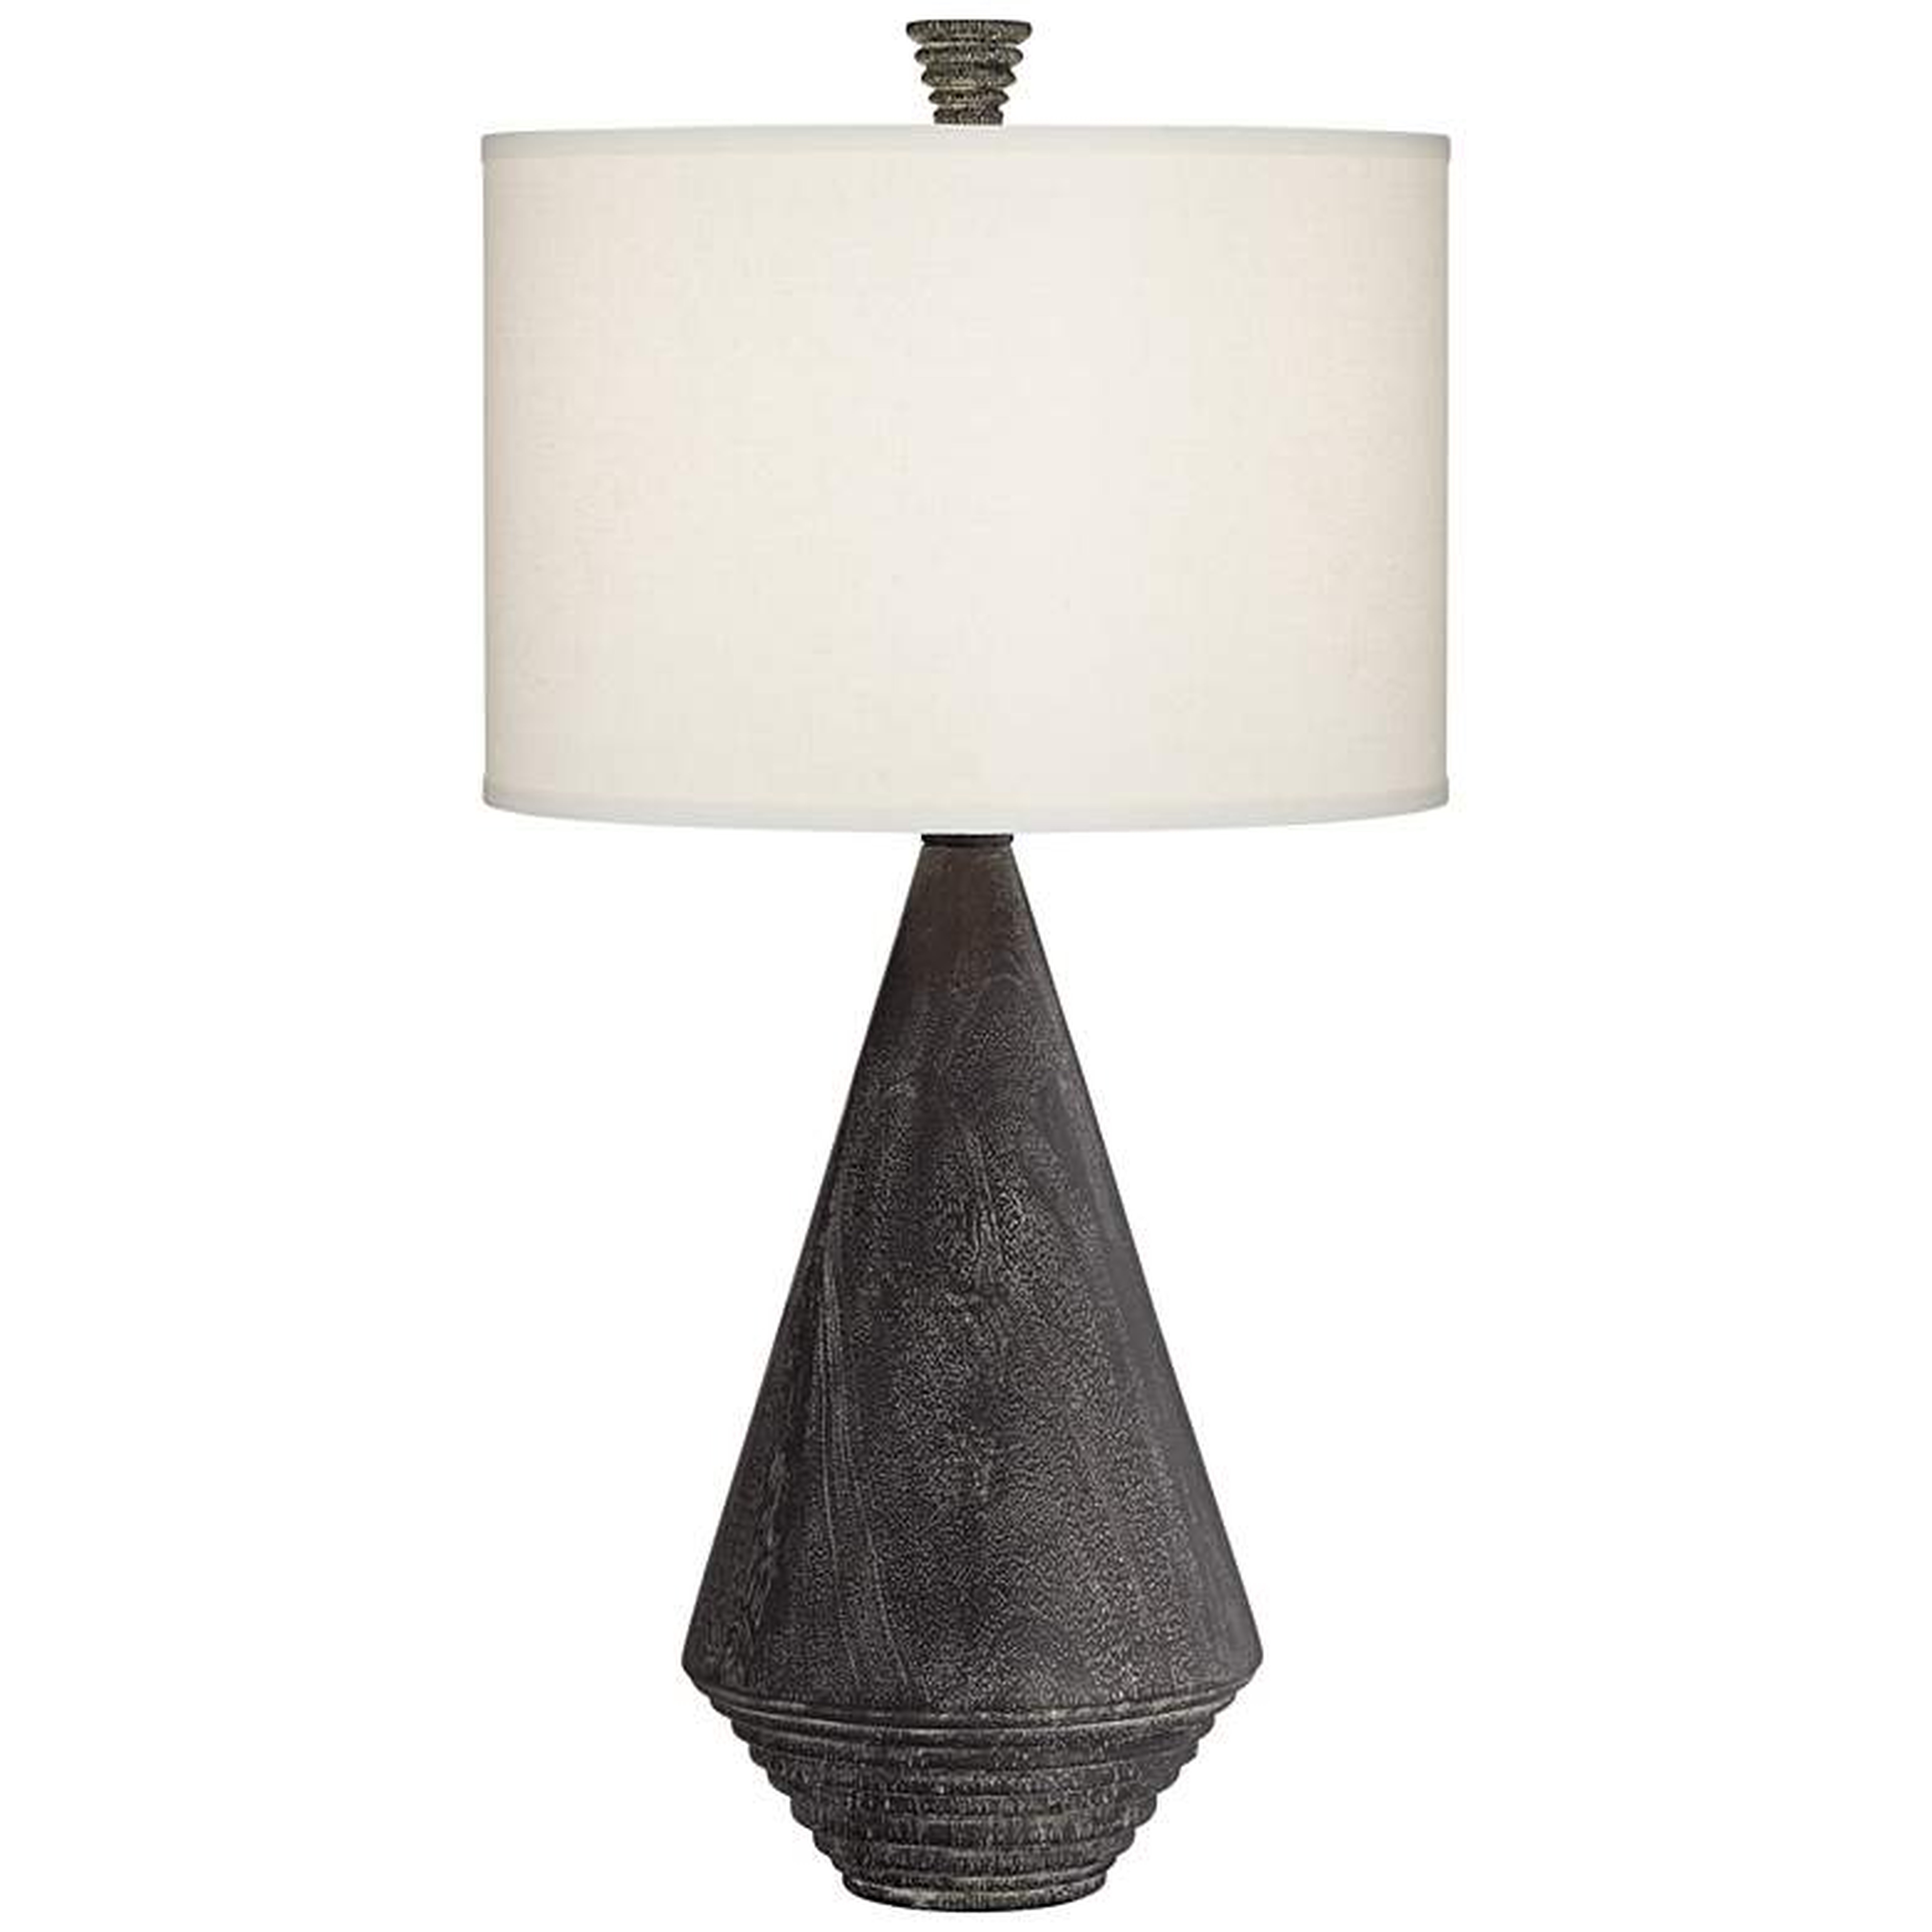 Adelis Black Texture Pyramid Table Lamp - Style # 75M51 - Lamps Plus